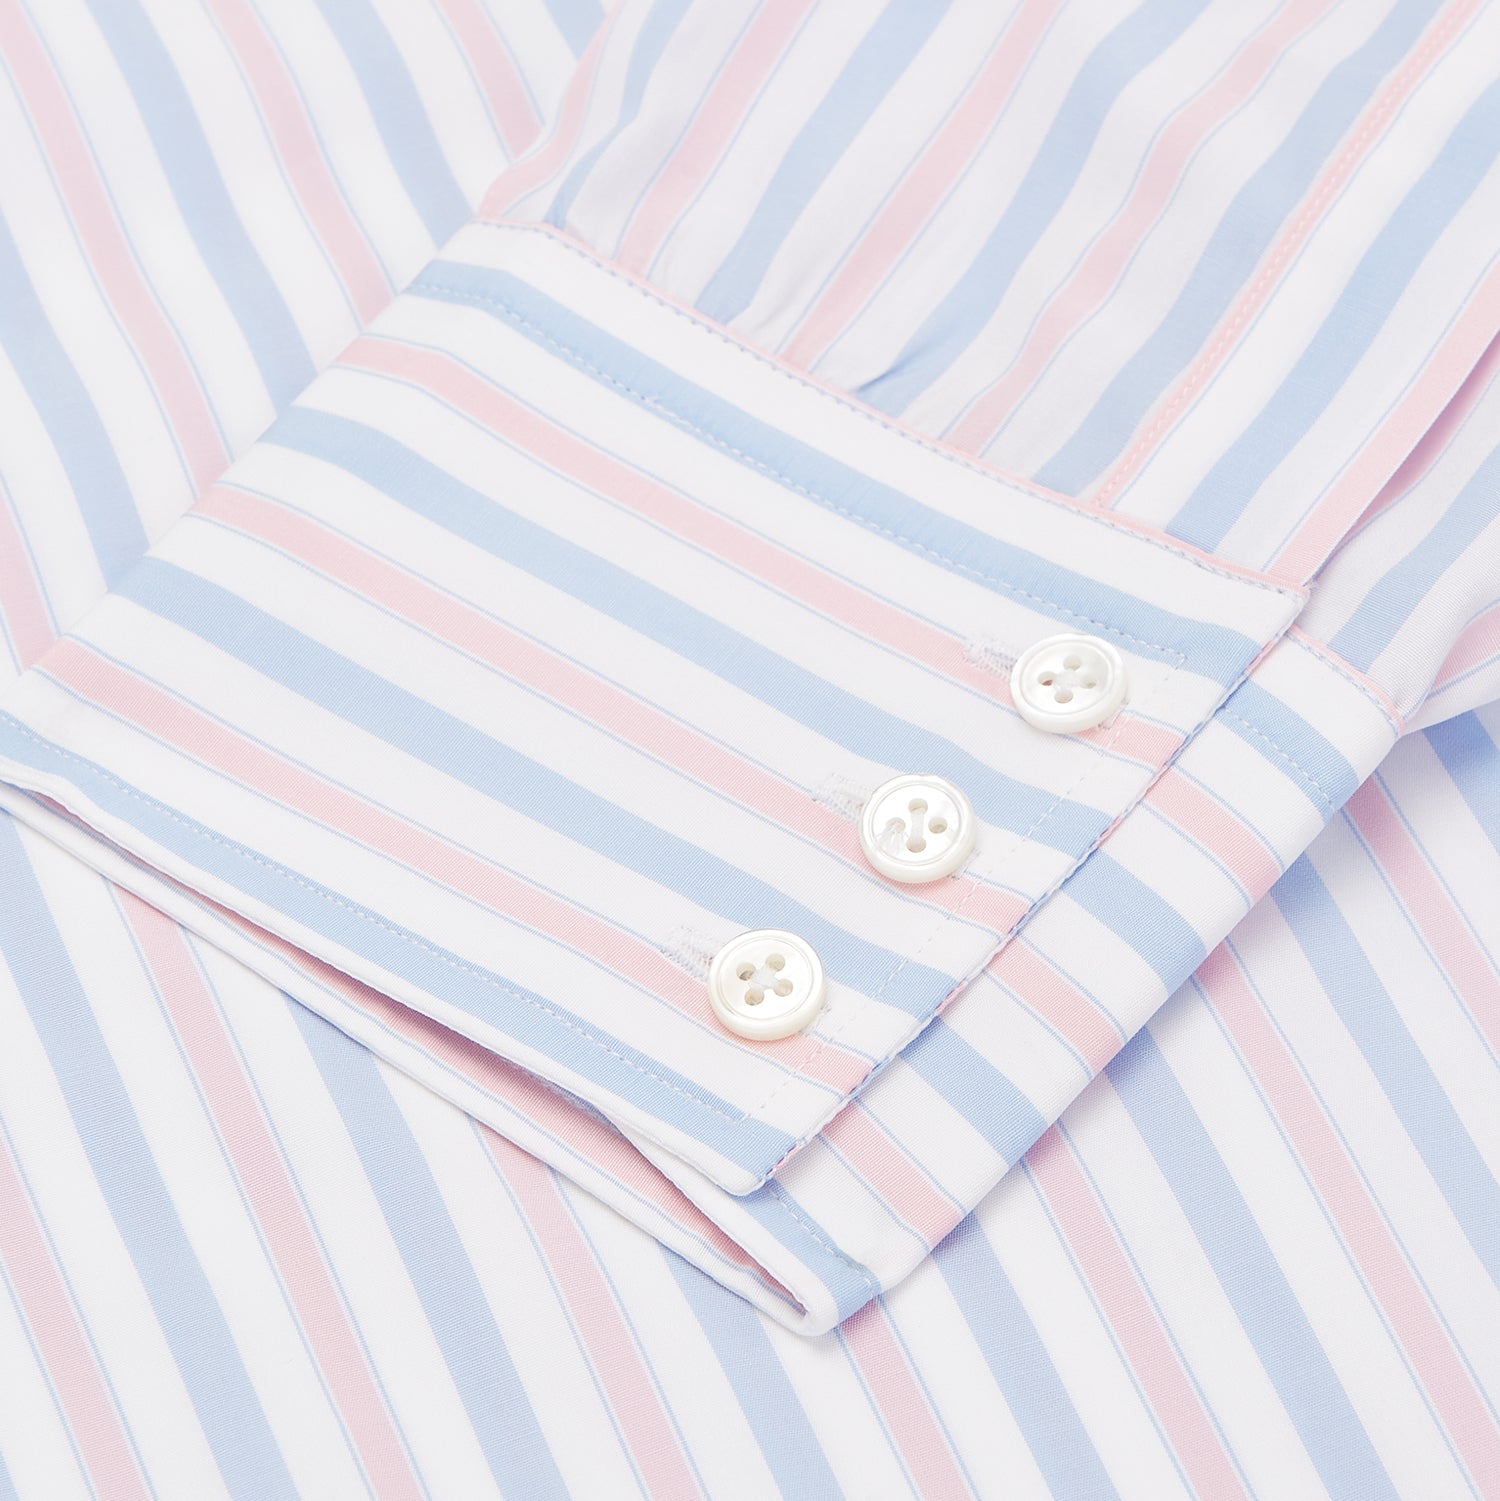 Blue and Pink Stripe Poplin Shirt with T&A Collar and 3-Button Cuffs